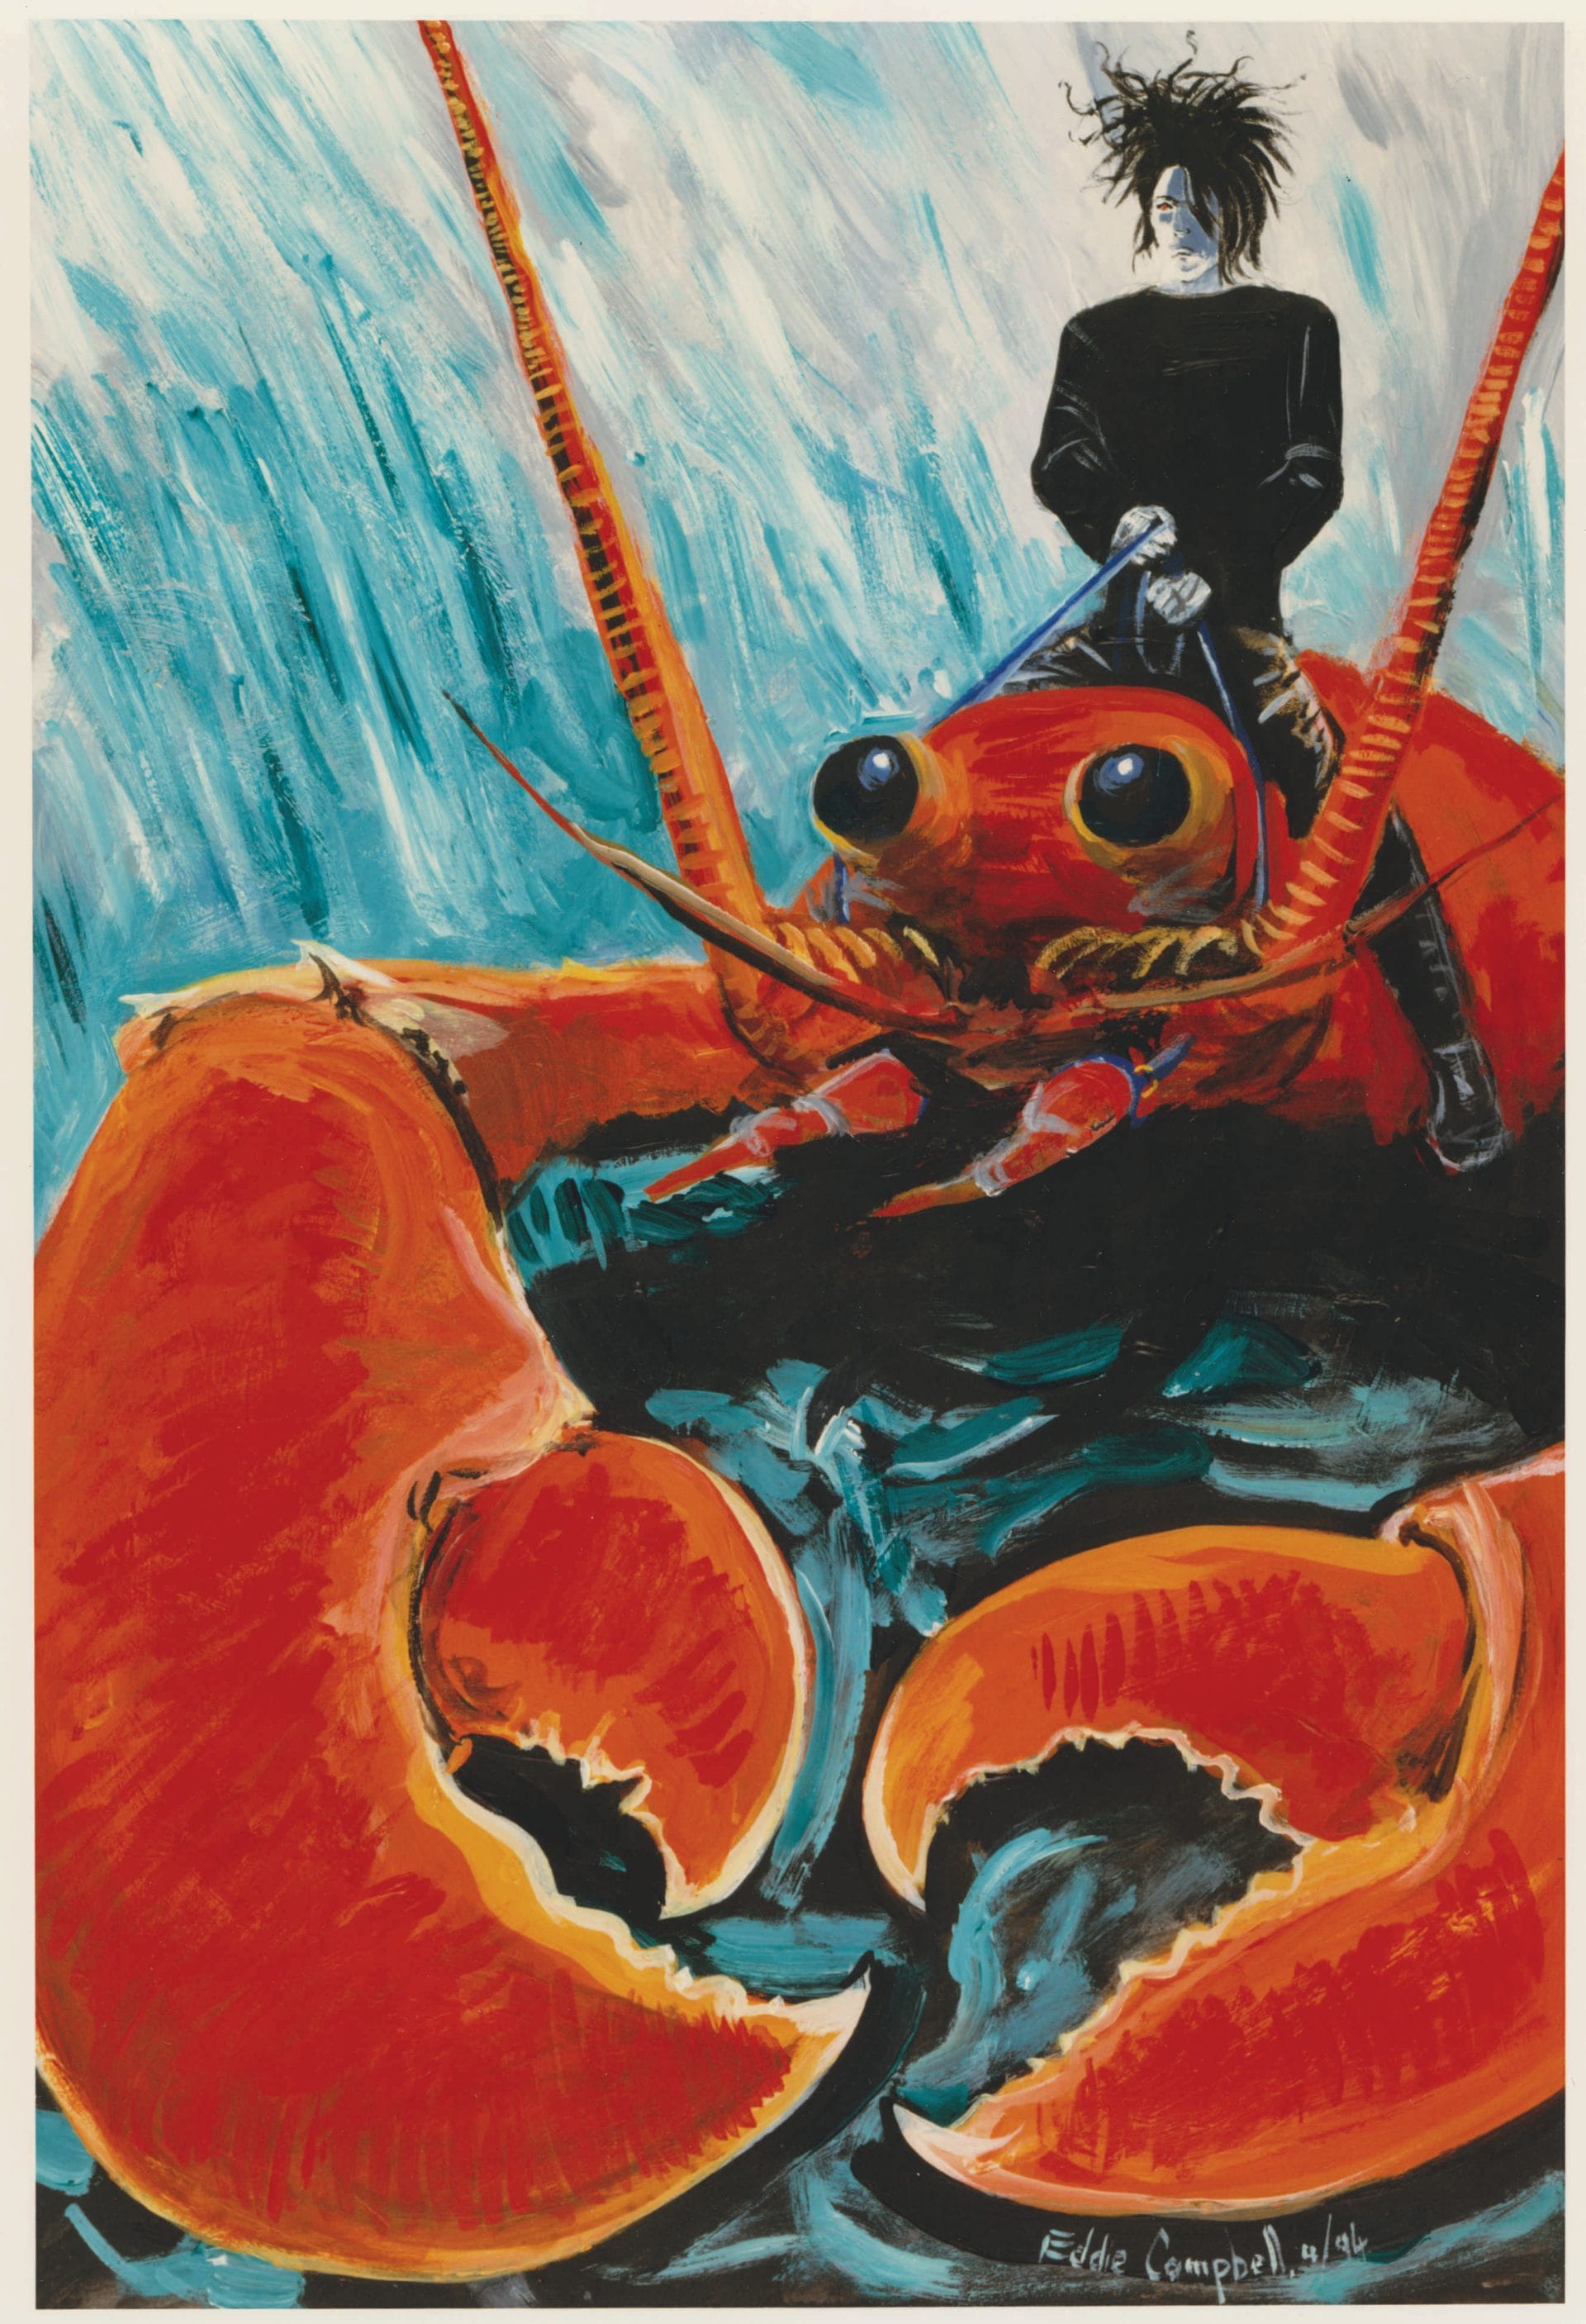 "Dream Riders a Lobster" Eddie Campbell (copyright DC)